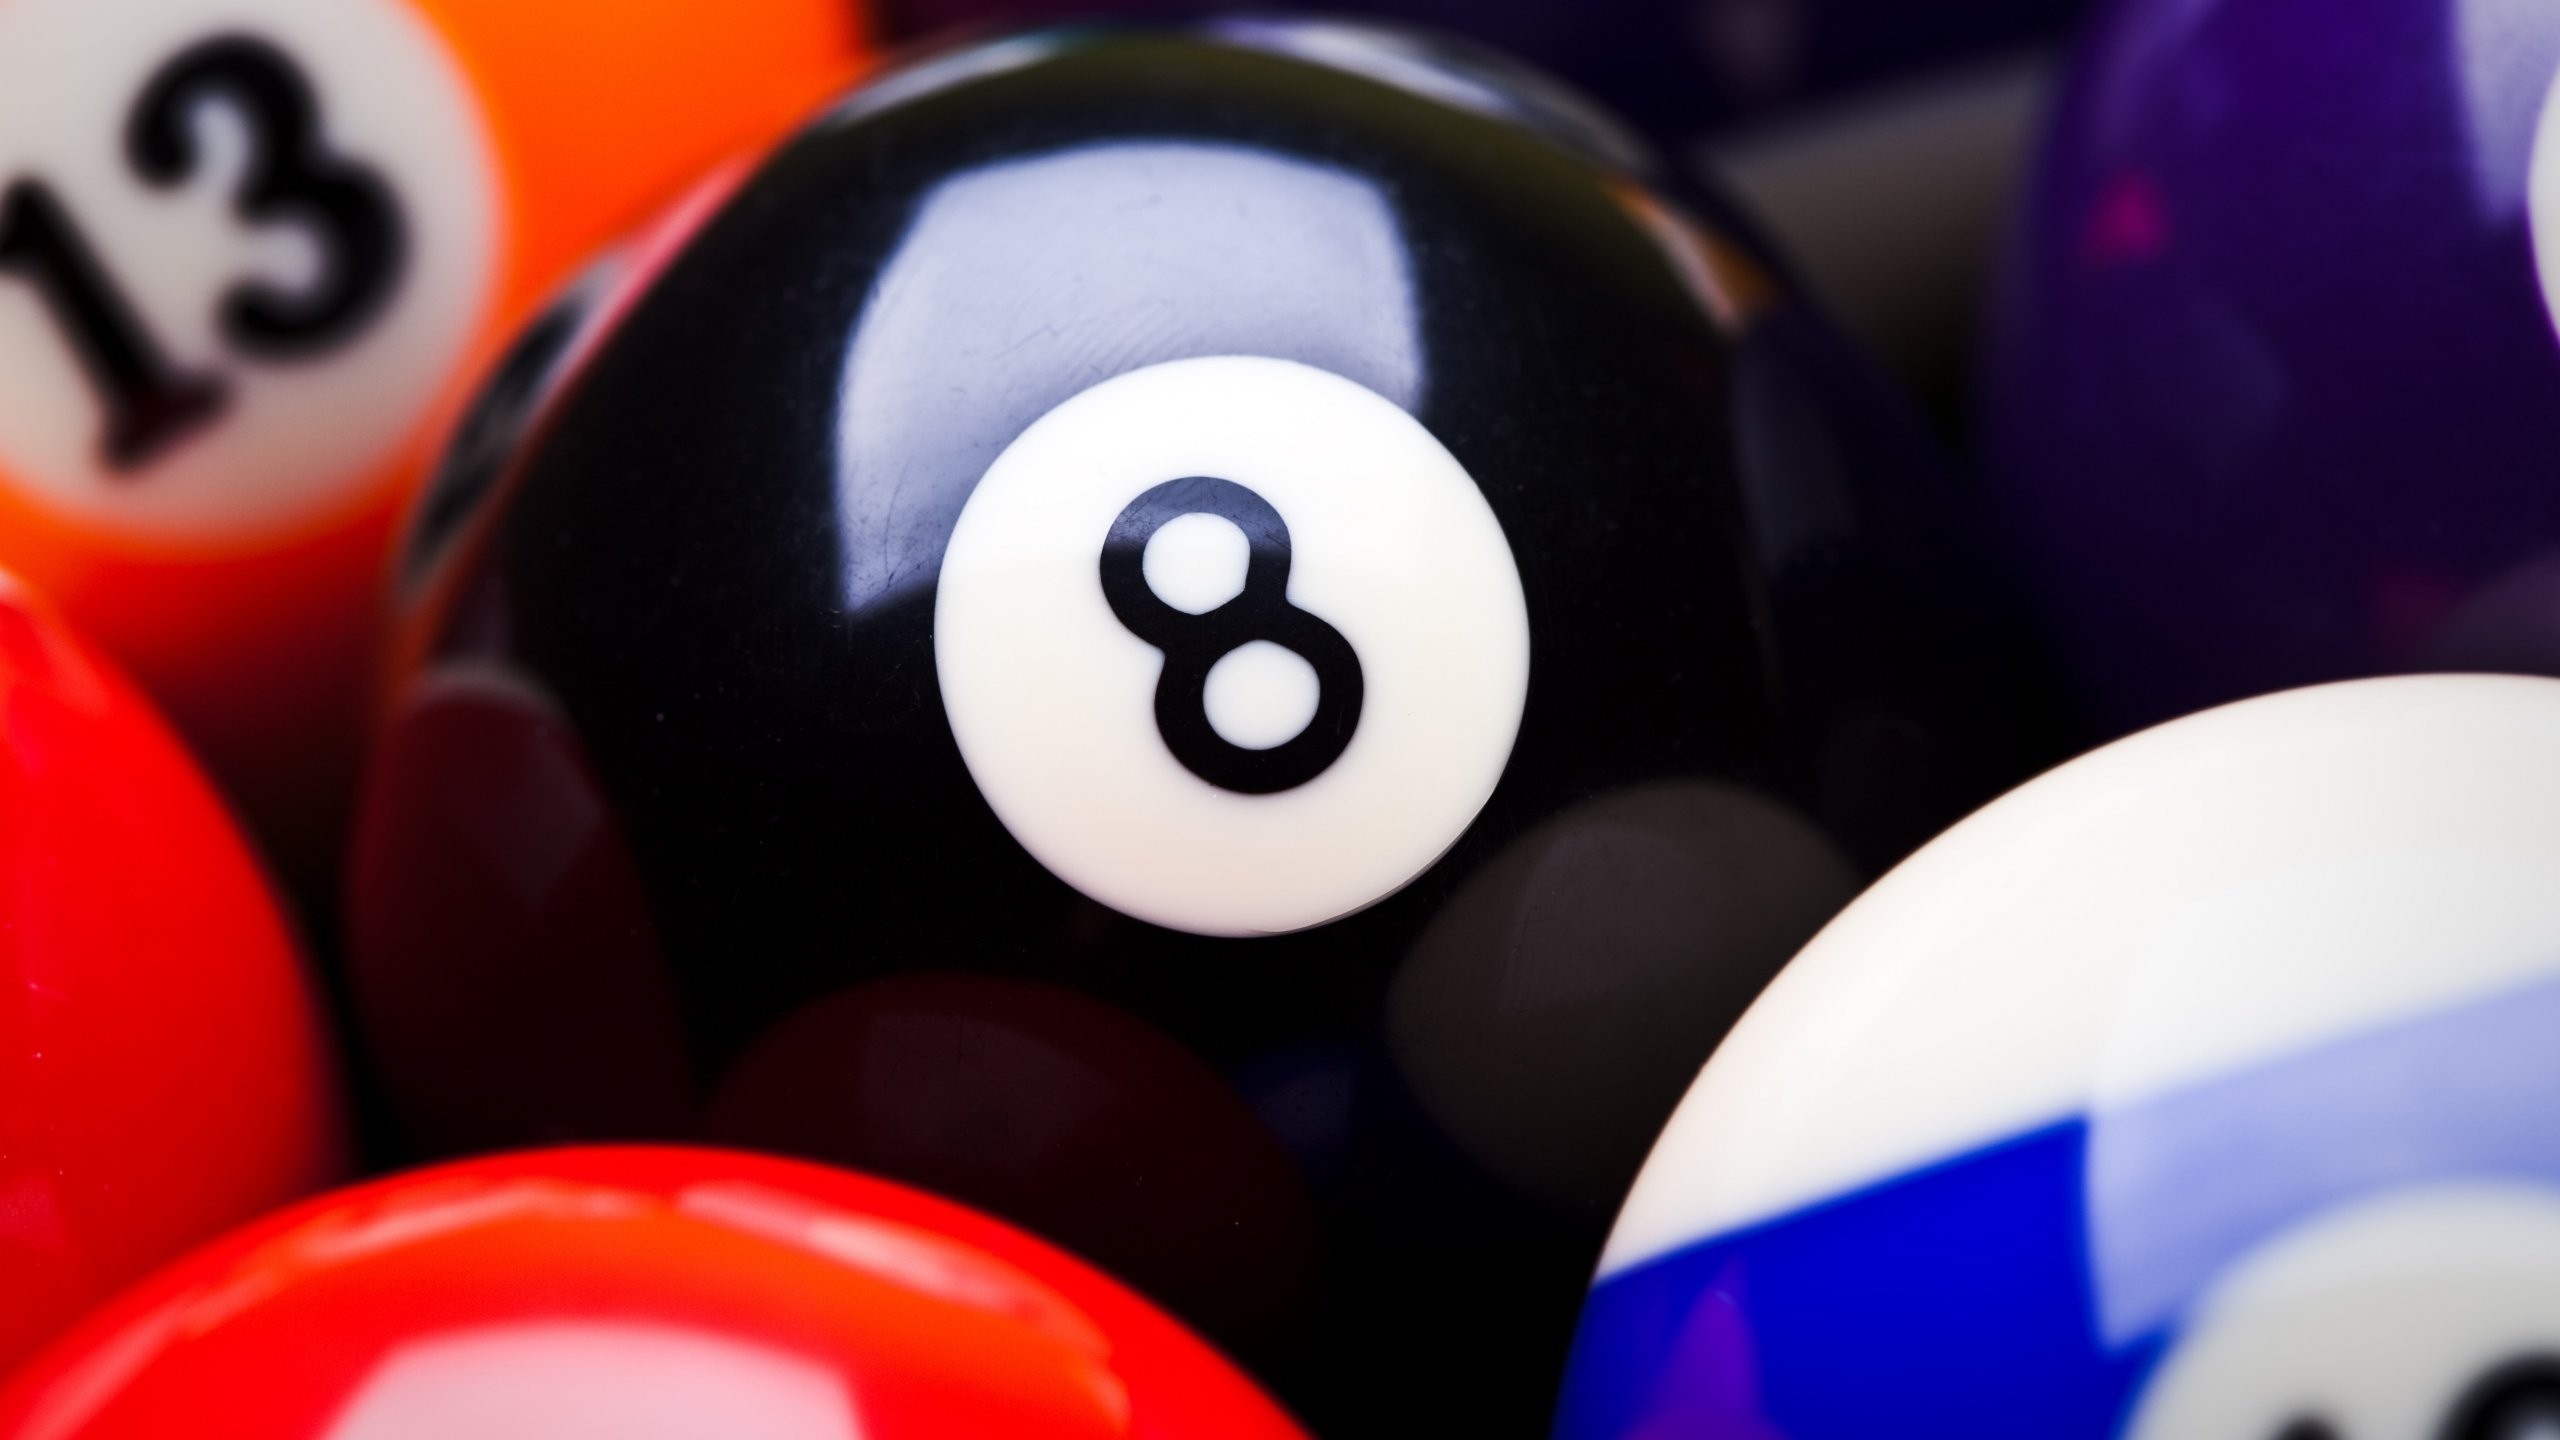 Cue Sports: The black 8 ball, An object ball in the classic eight-ball game. 2560x1440 HD Wallpaper.